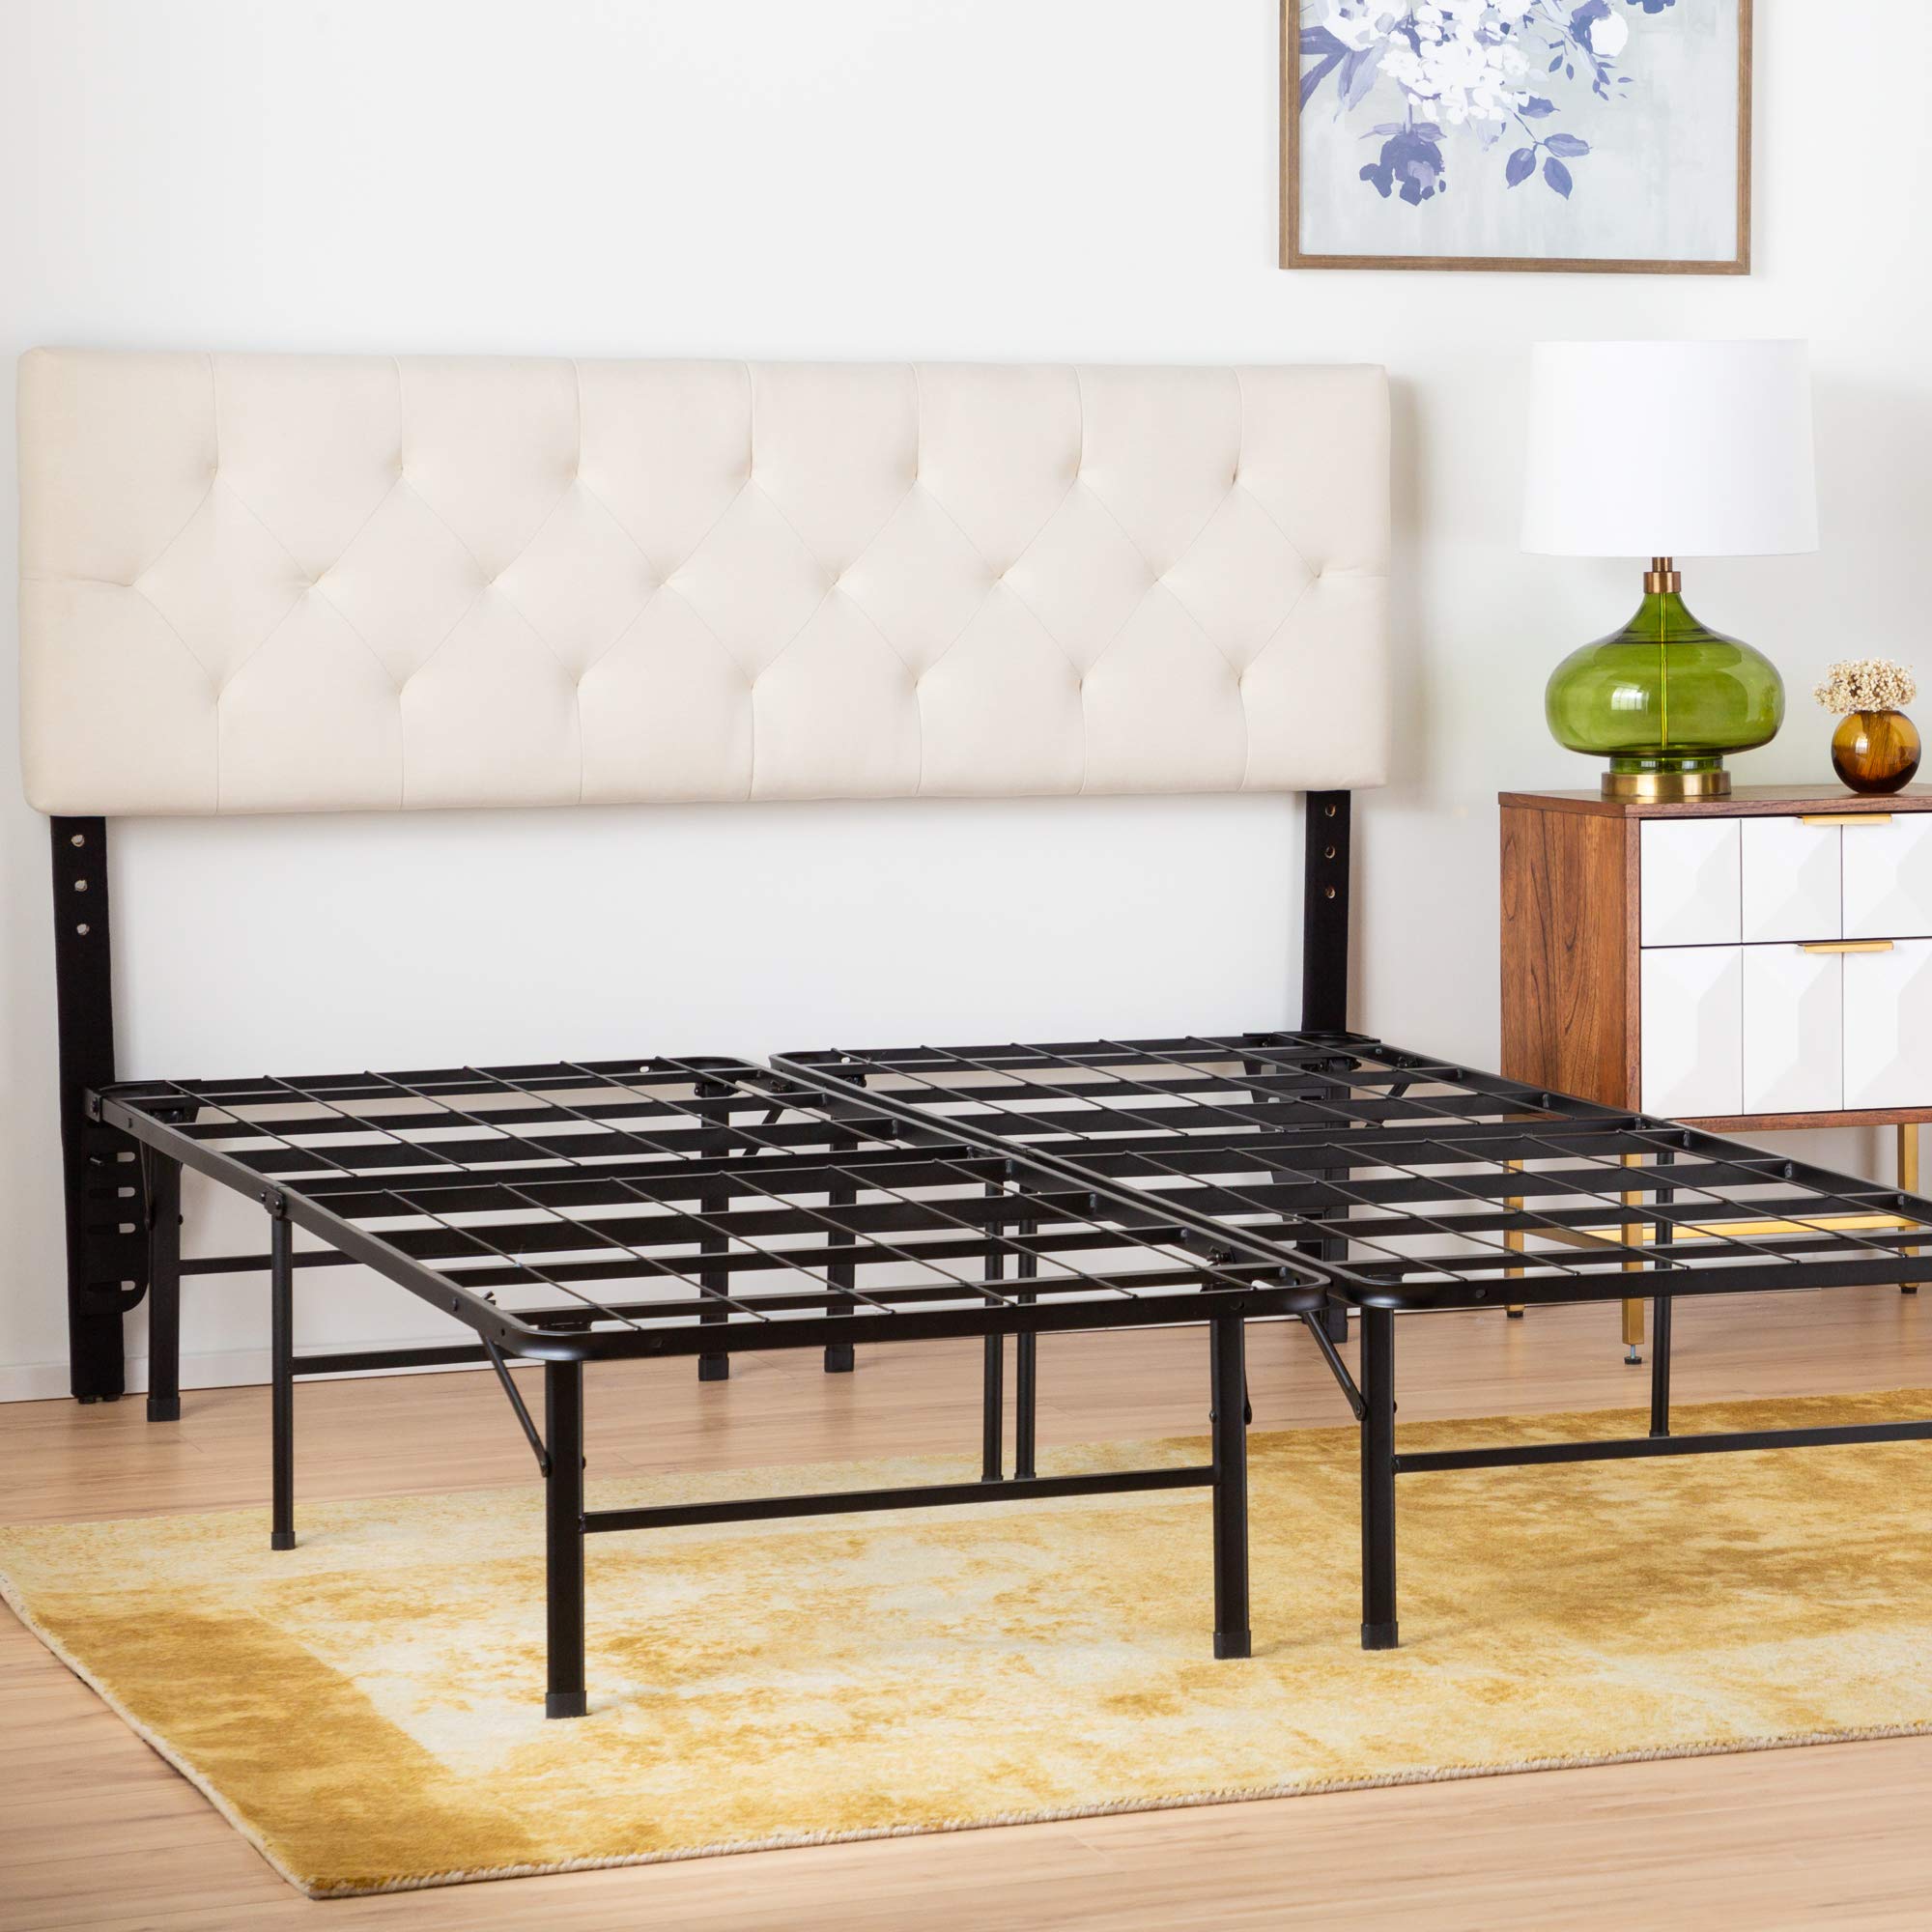 How To Attach A Headboard To A Metal Bed Frame